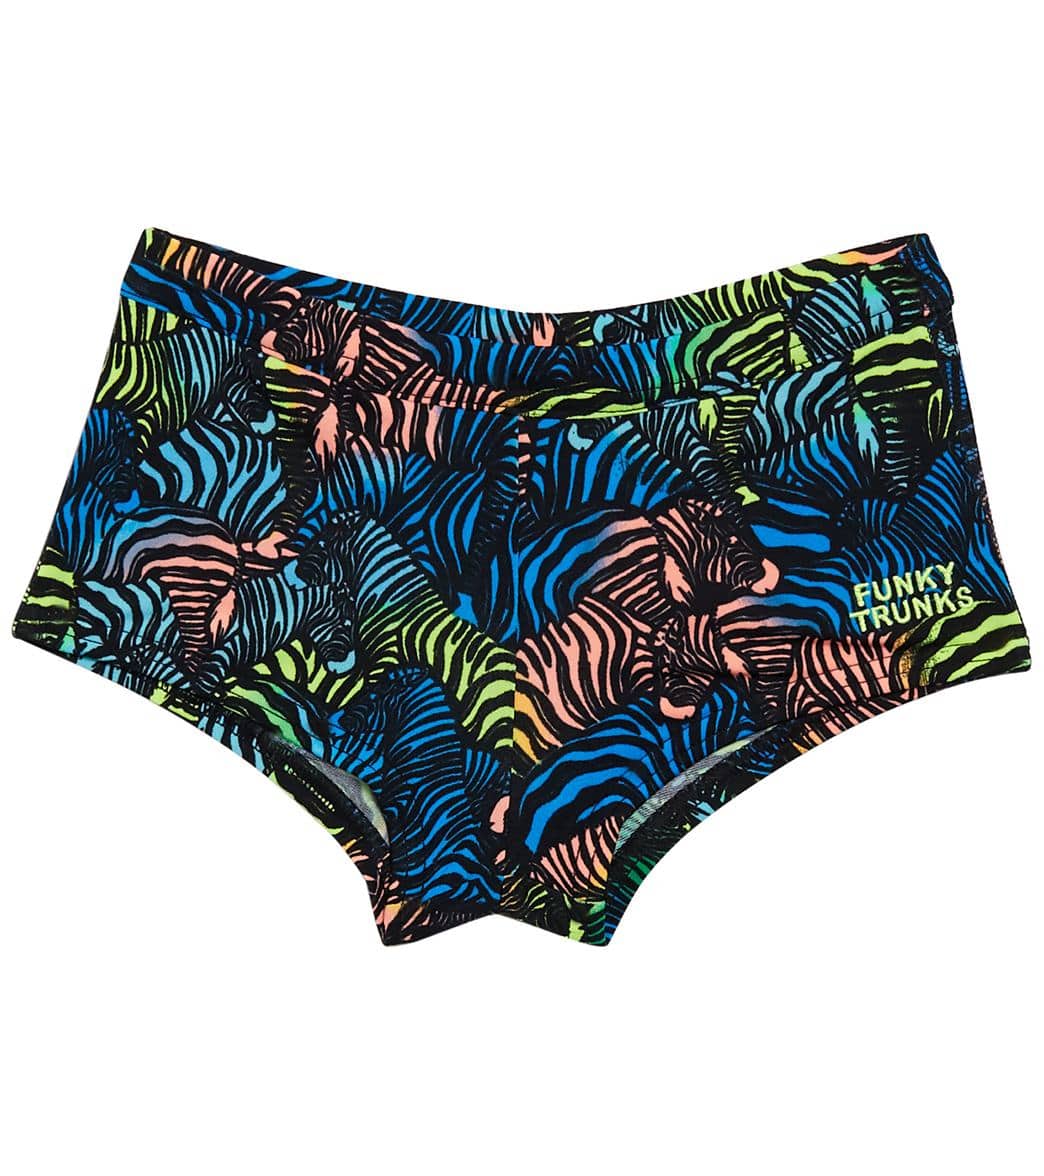 Funky Trunks Toddler Boys' Colour Run Eco Square Leg Trunk Brief Swimsuit - Multi 1T Polyester - Swimoutlet.com